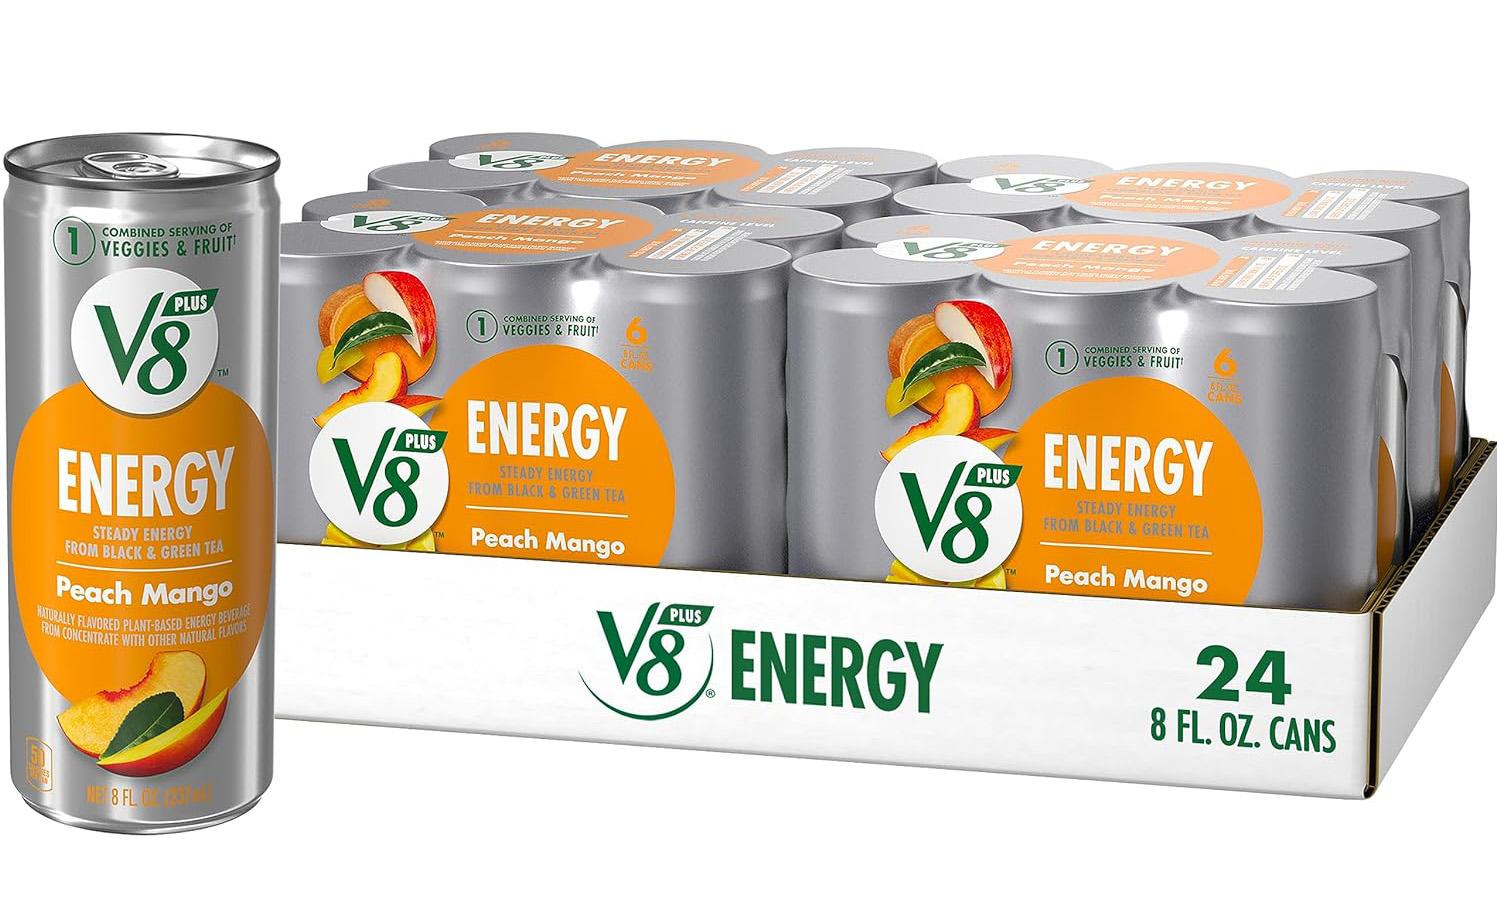 V8 +ENERGY Peach Mango Energy Drink 24 Cans for $13.75 Shipped